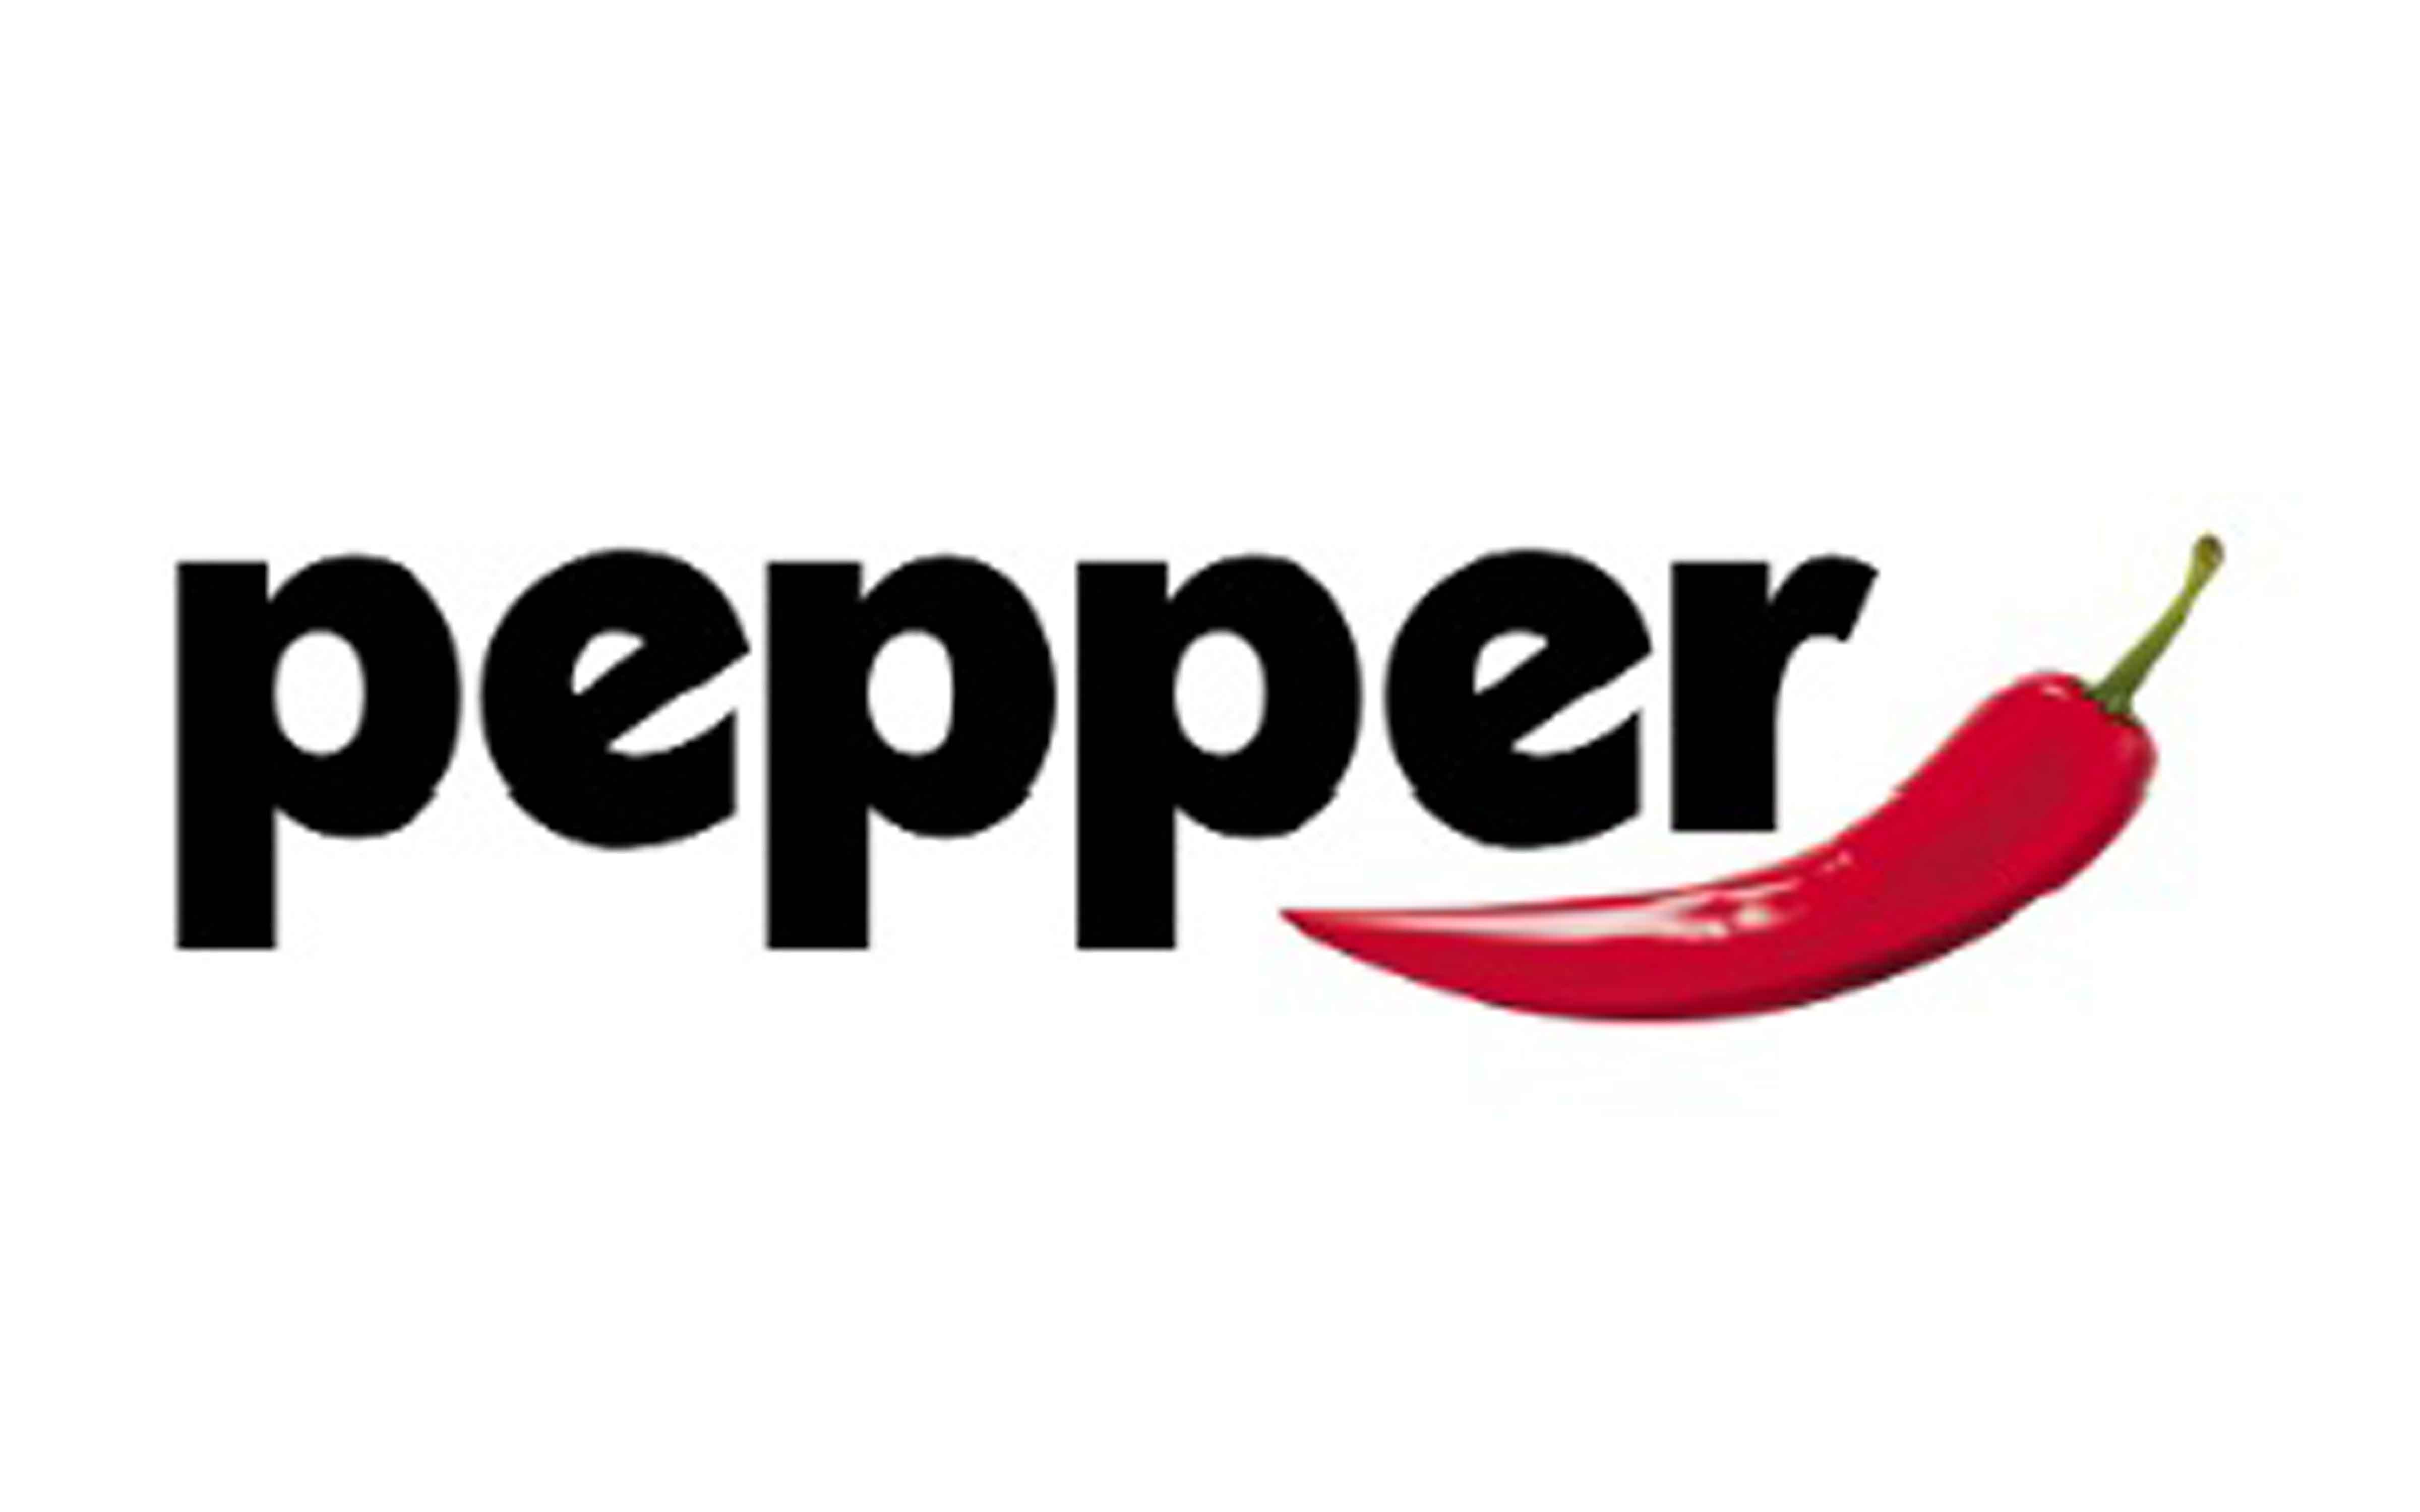 Pepper Money revamps range, launches new portal - Mortgage Strategy